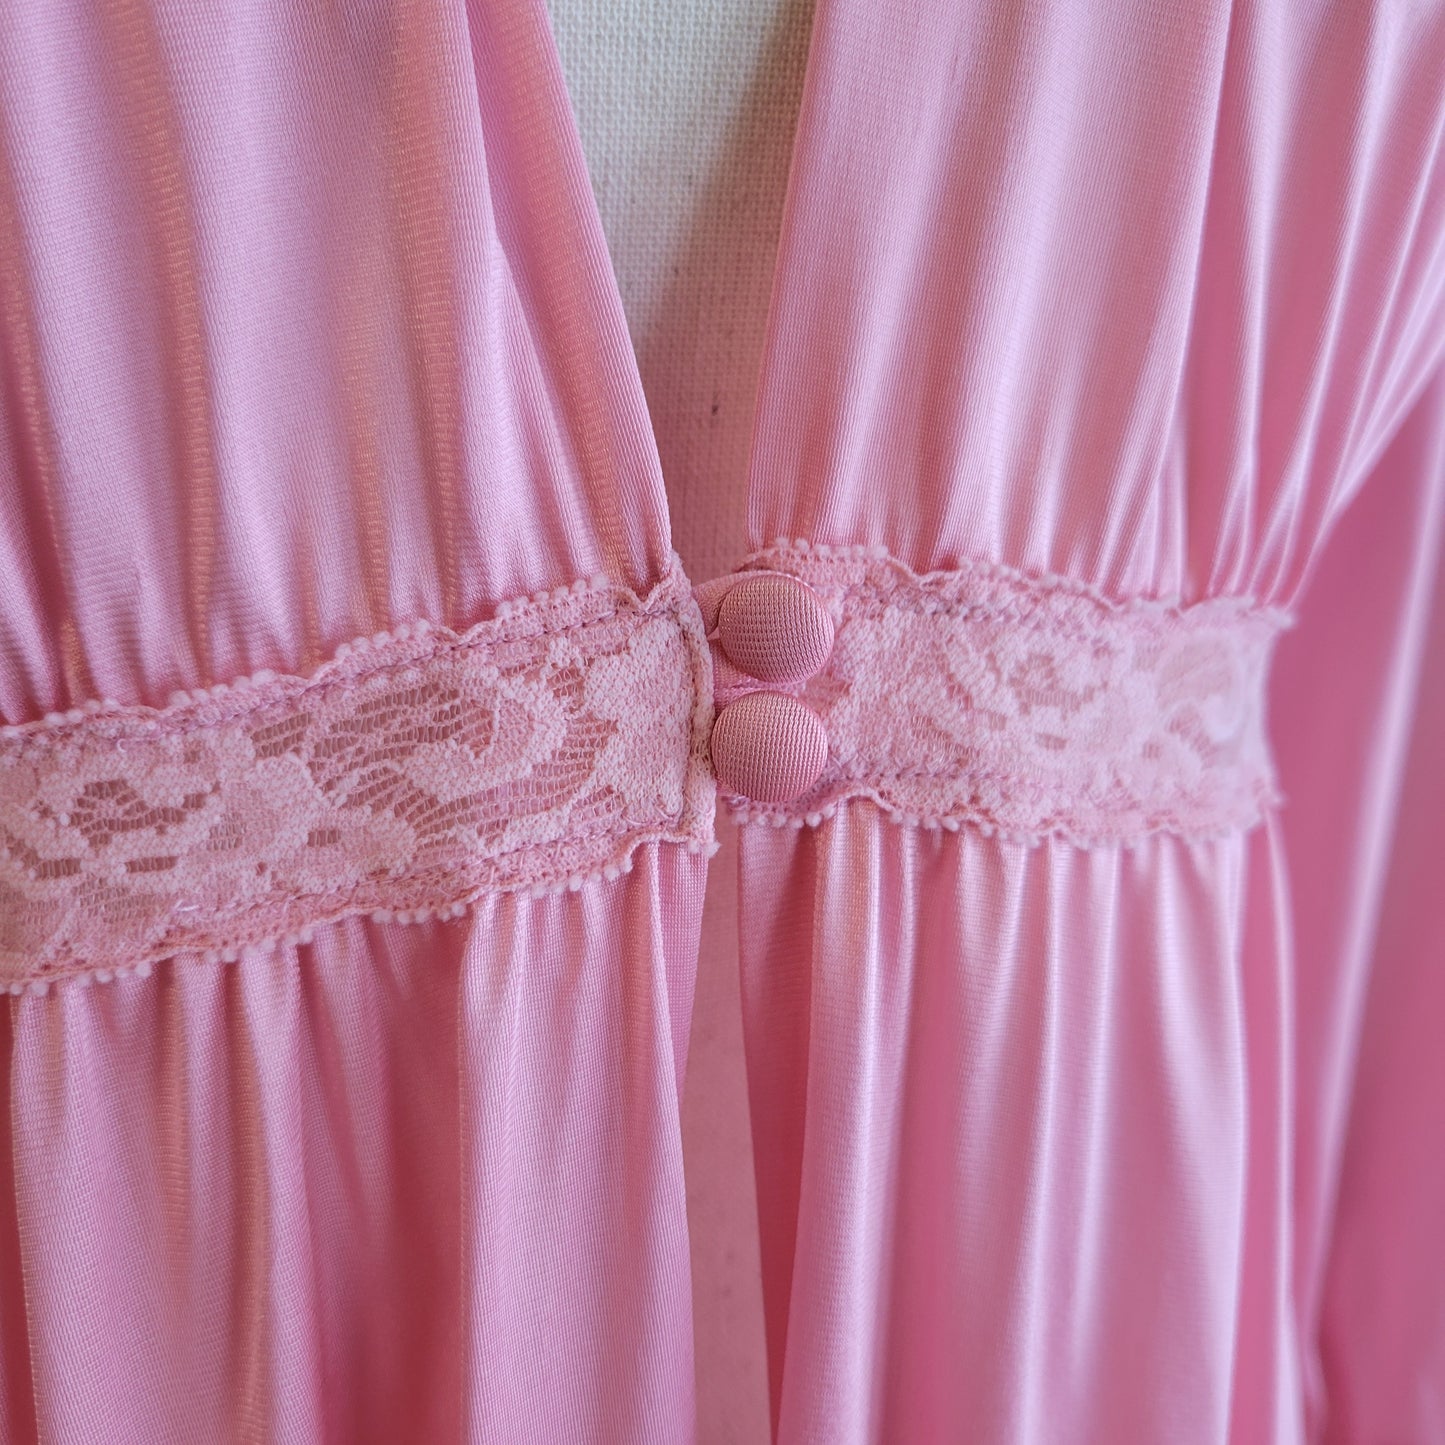 Kayser 60's Vintage Pink Long Sleeve Duster Dress - small